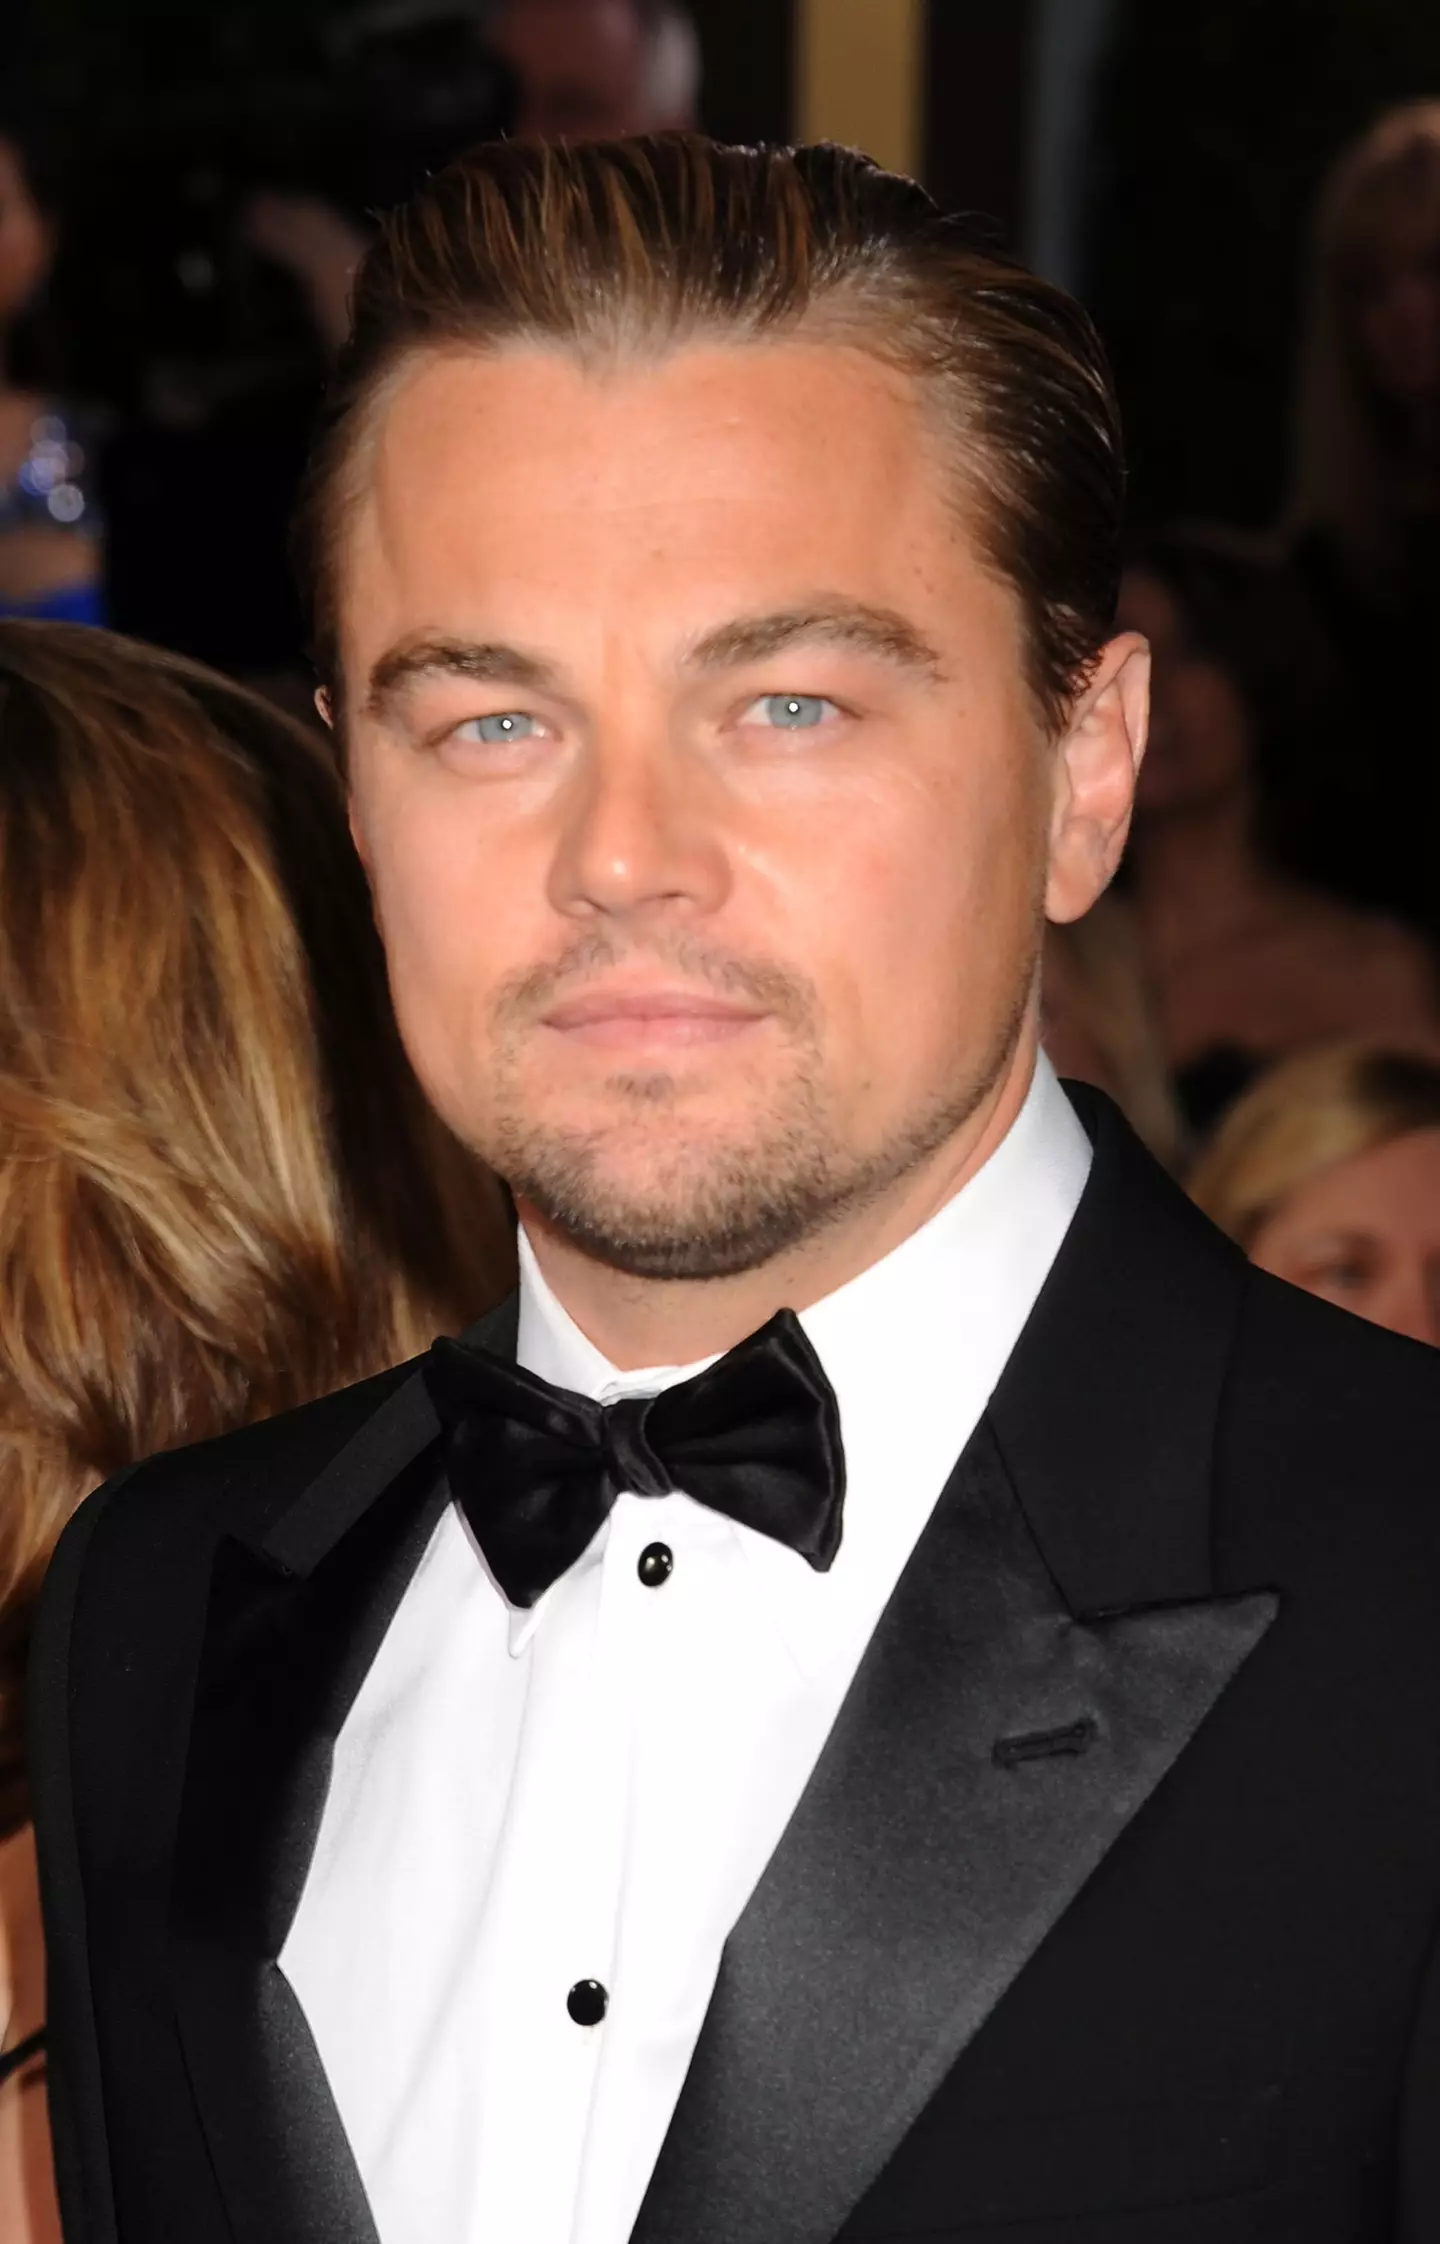 Leonardo DiCaprio's dating history is in the spotlight once again..